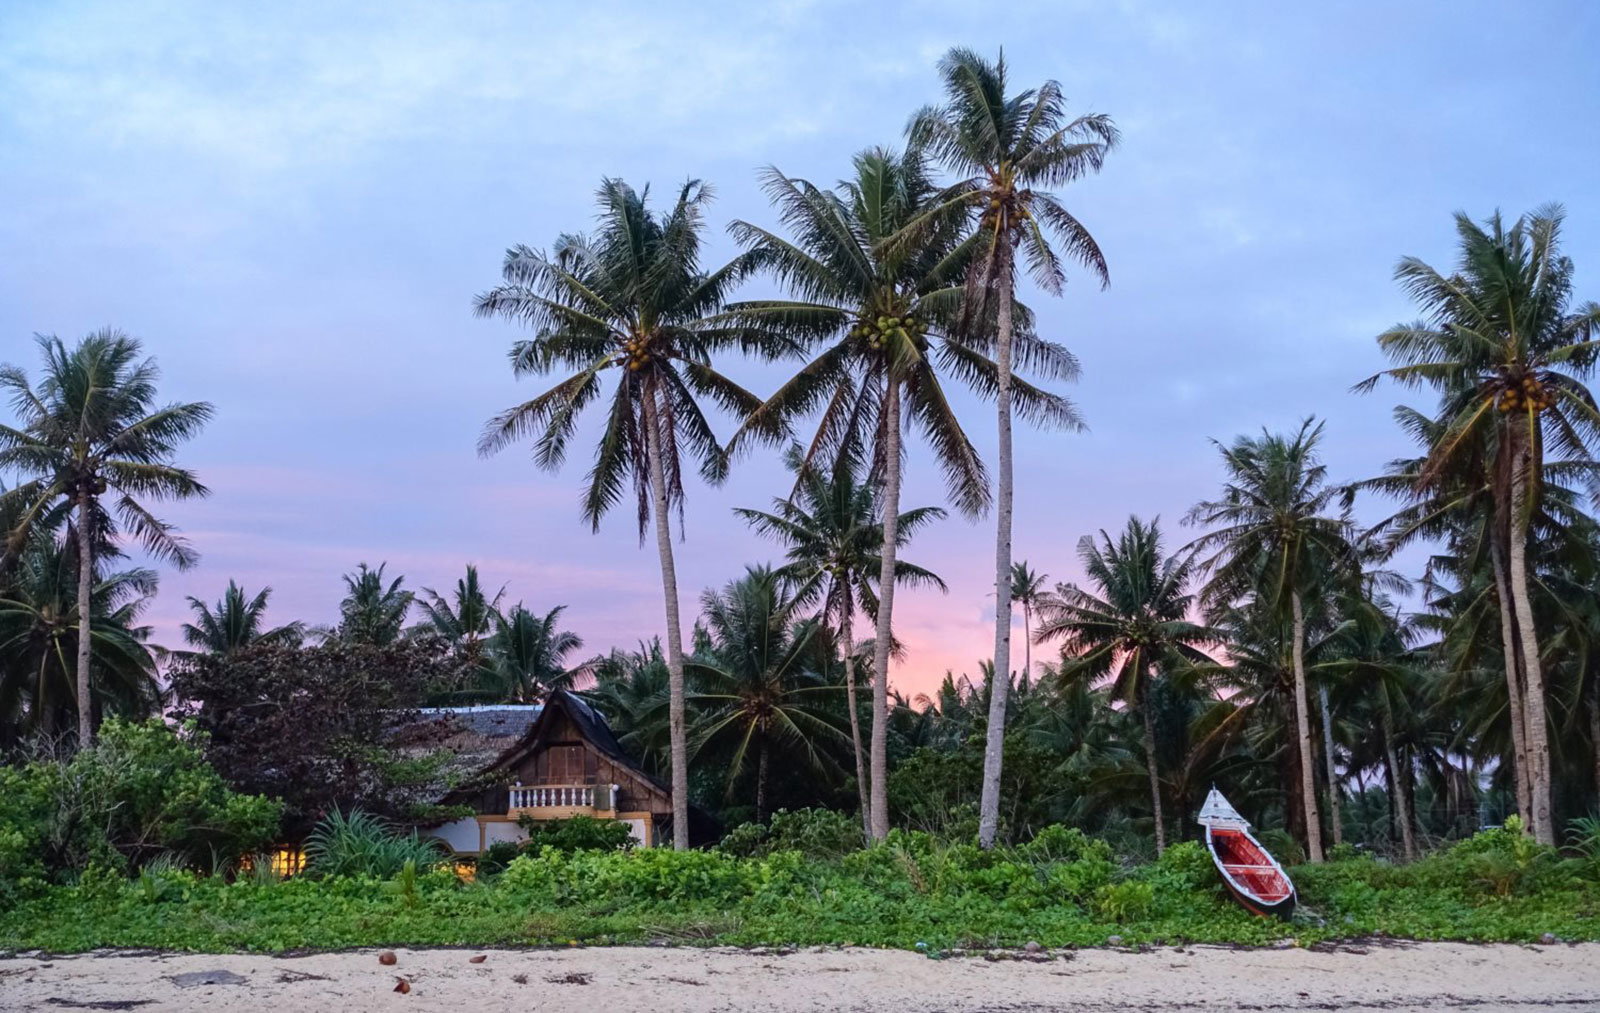 Beach resort and oink sunset at Siargao, Philippines